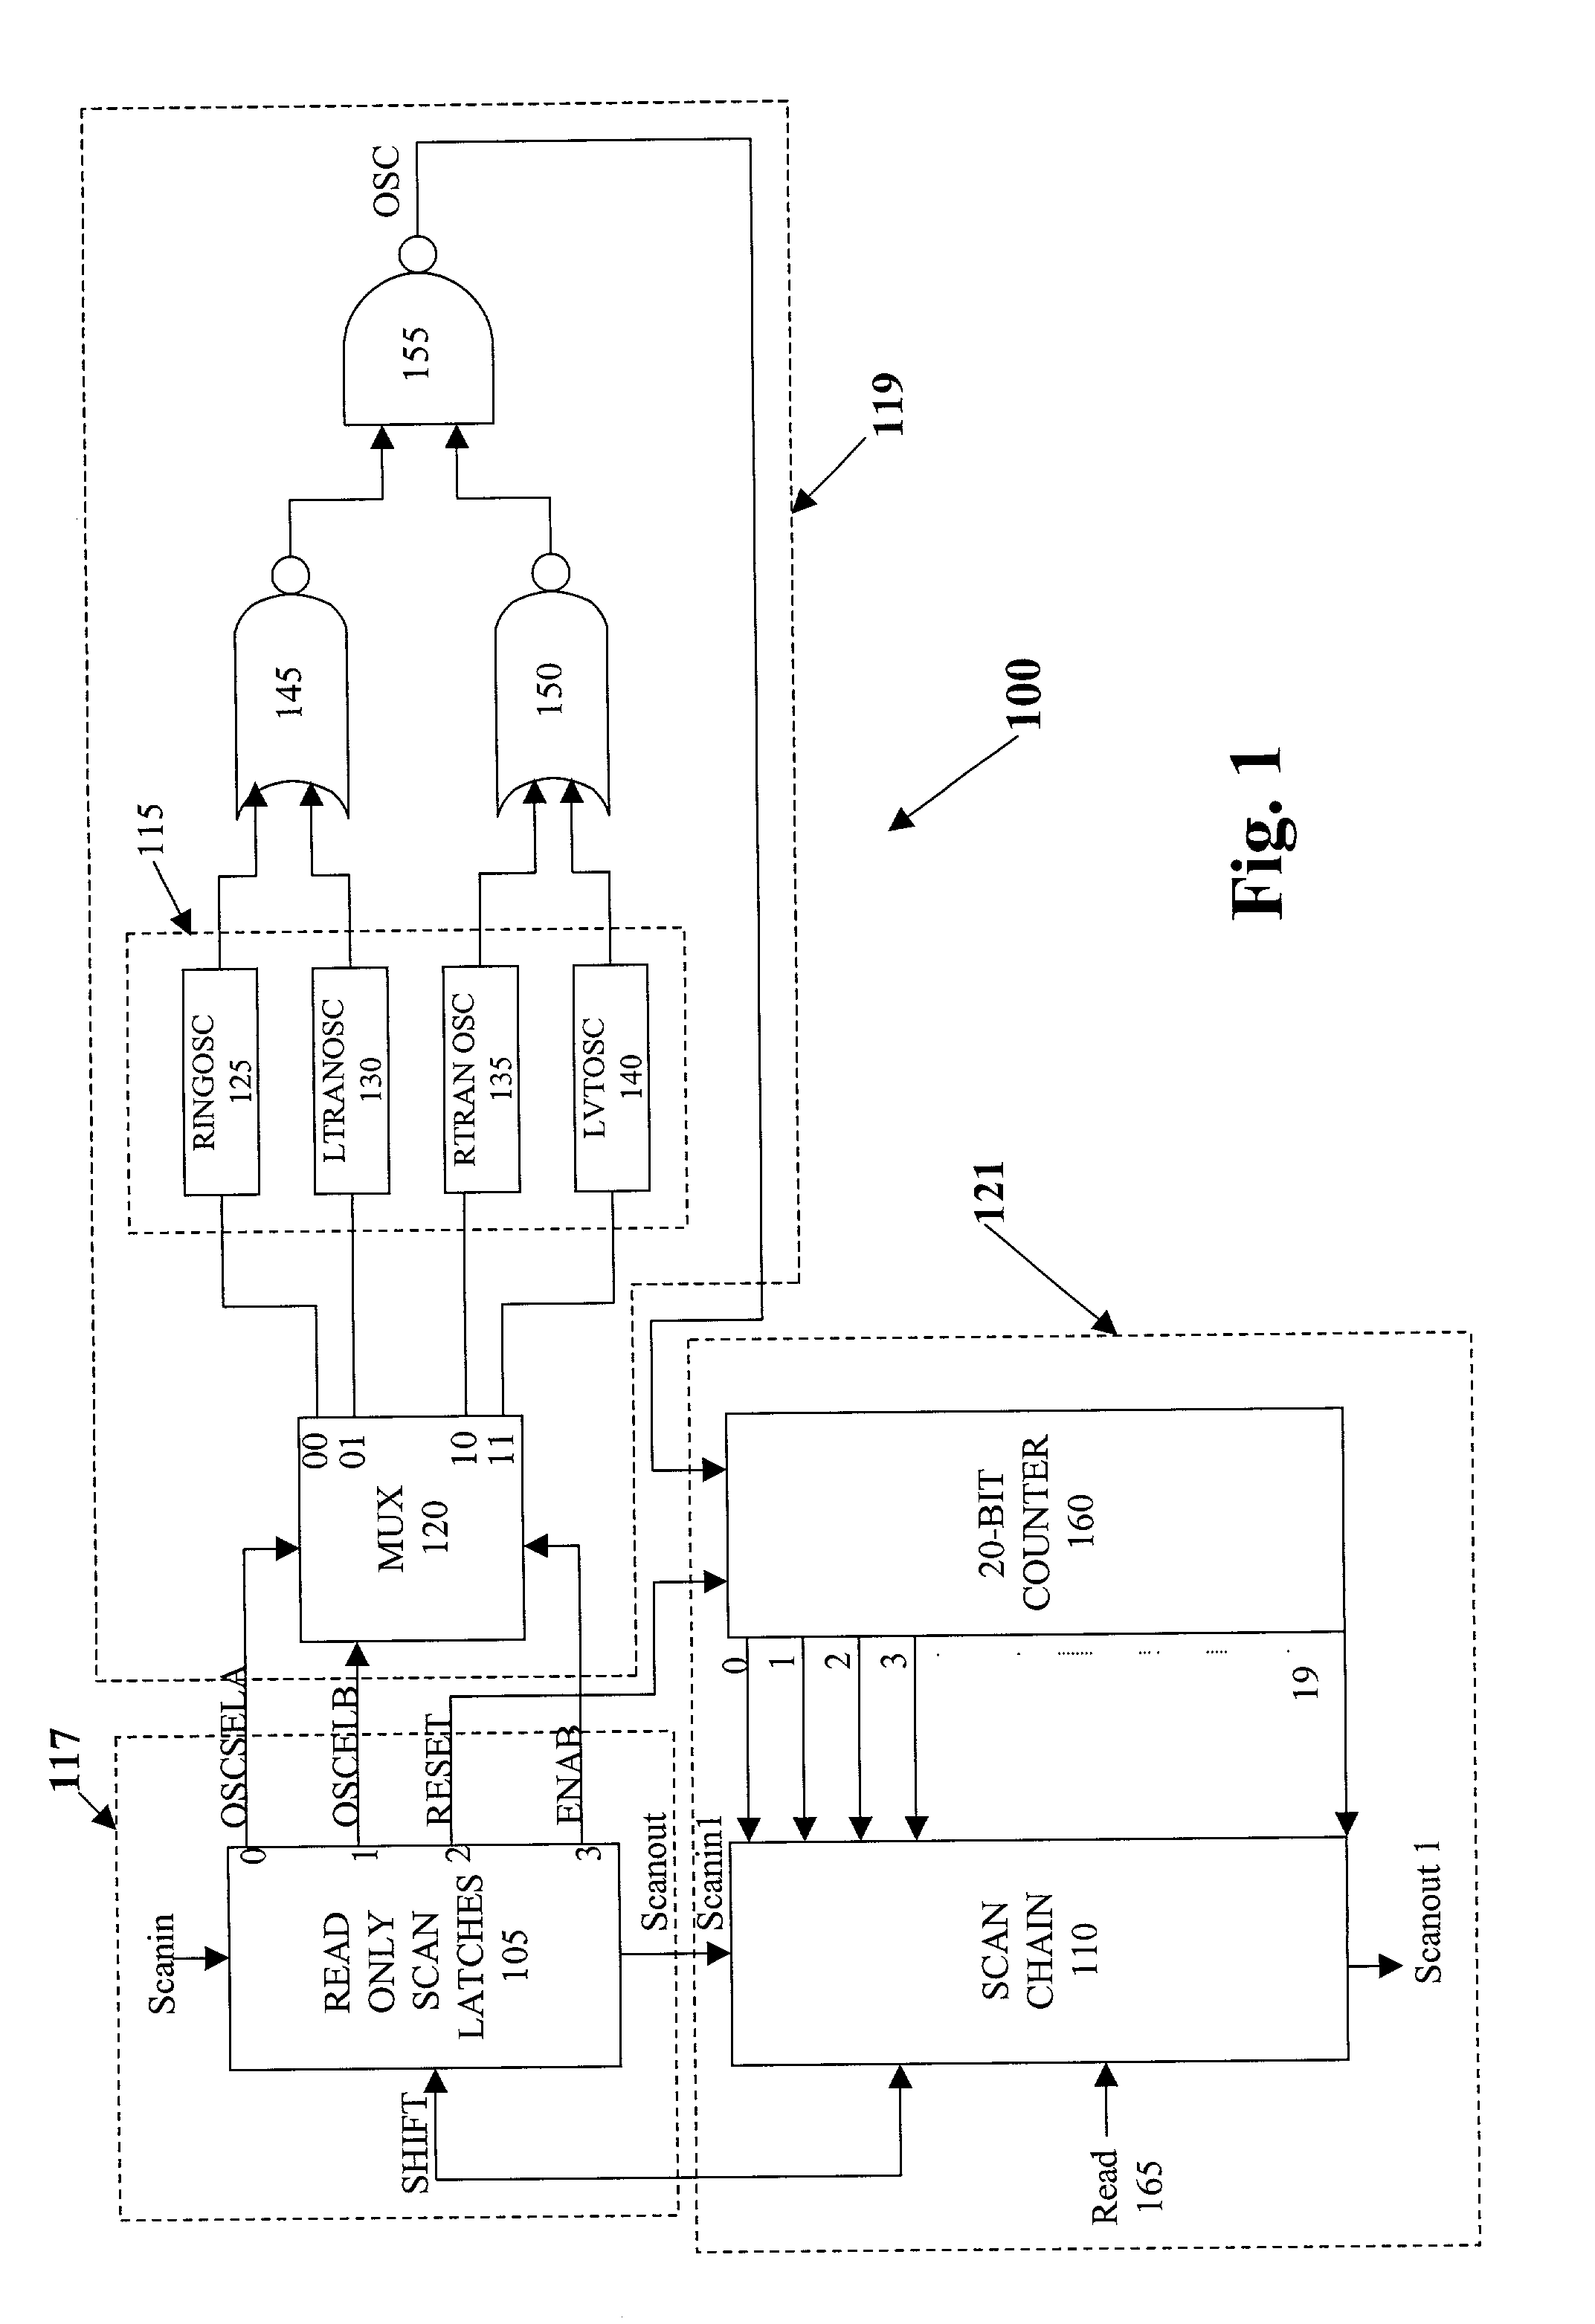 Scan based multiple ring oscillator structure for on-chip speed measurement